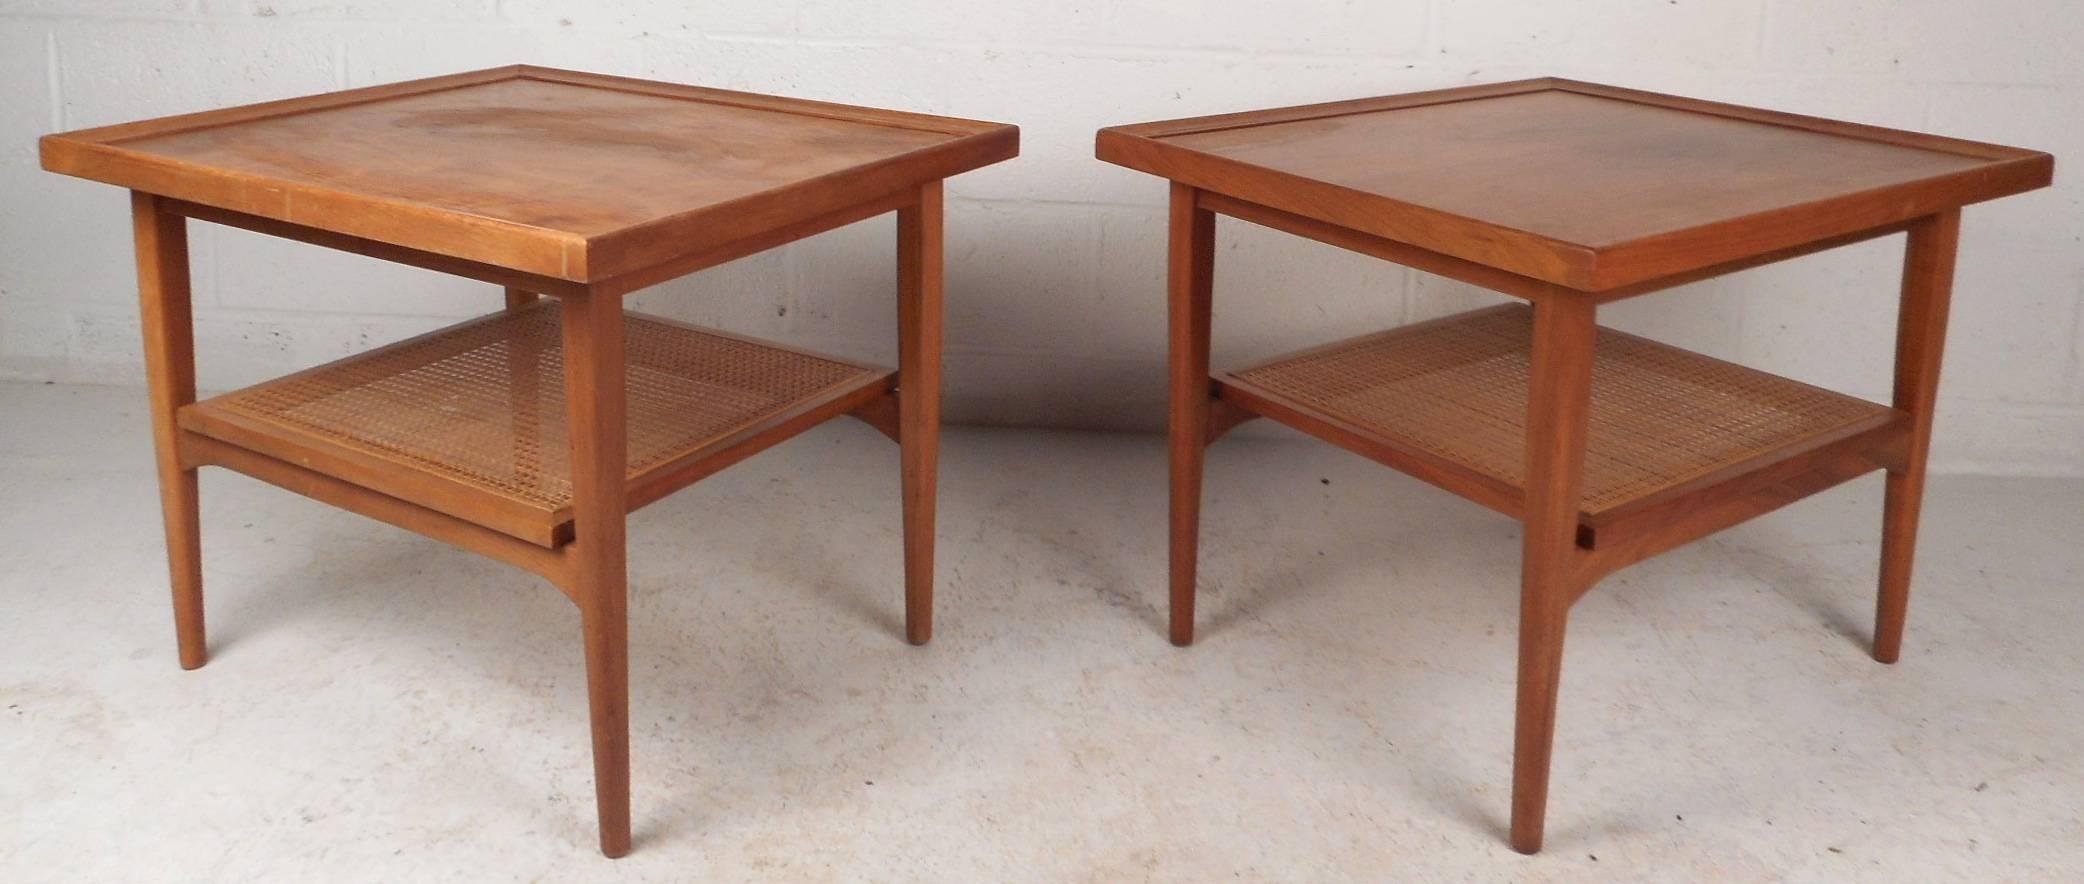 This gorgeous pair of vintage modern end tables feature a unique cane lower shelf for storing additional items. Quality construction with raised and bevelled edges along the tabletop. Stunning wood grain and tapered legs add to the allure. This